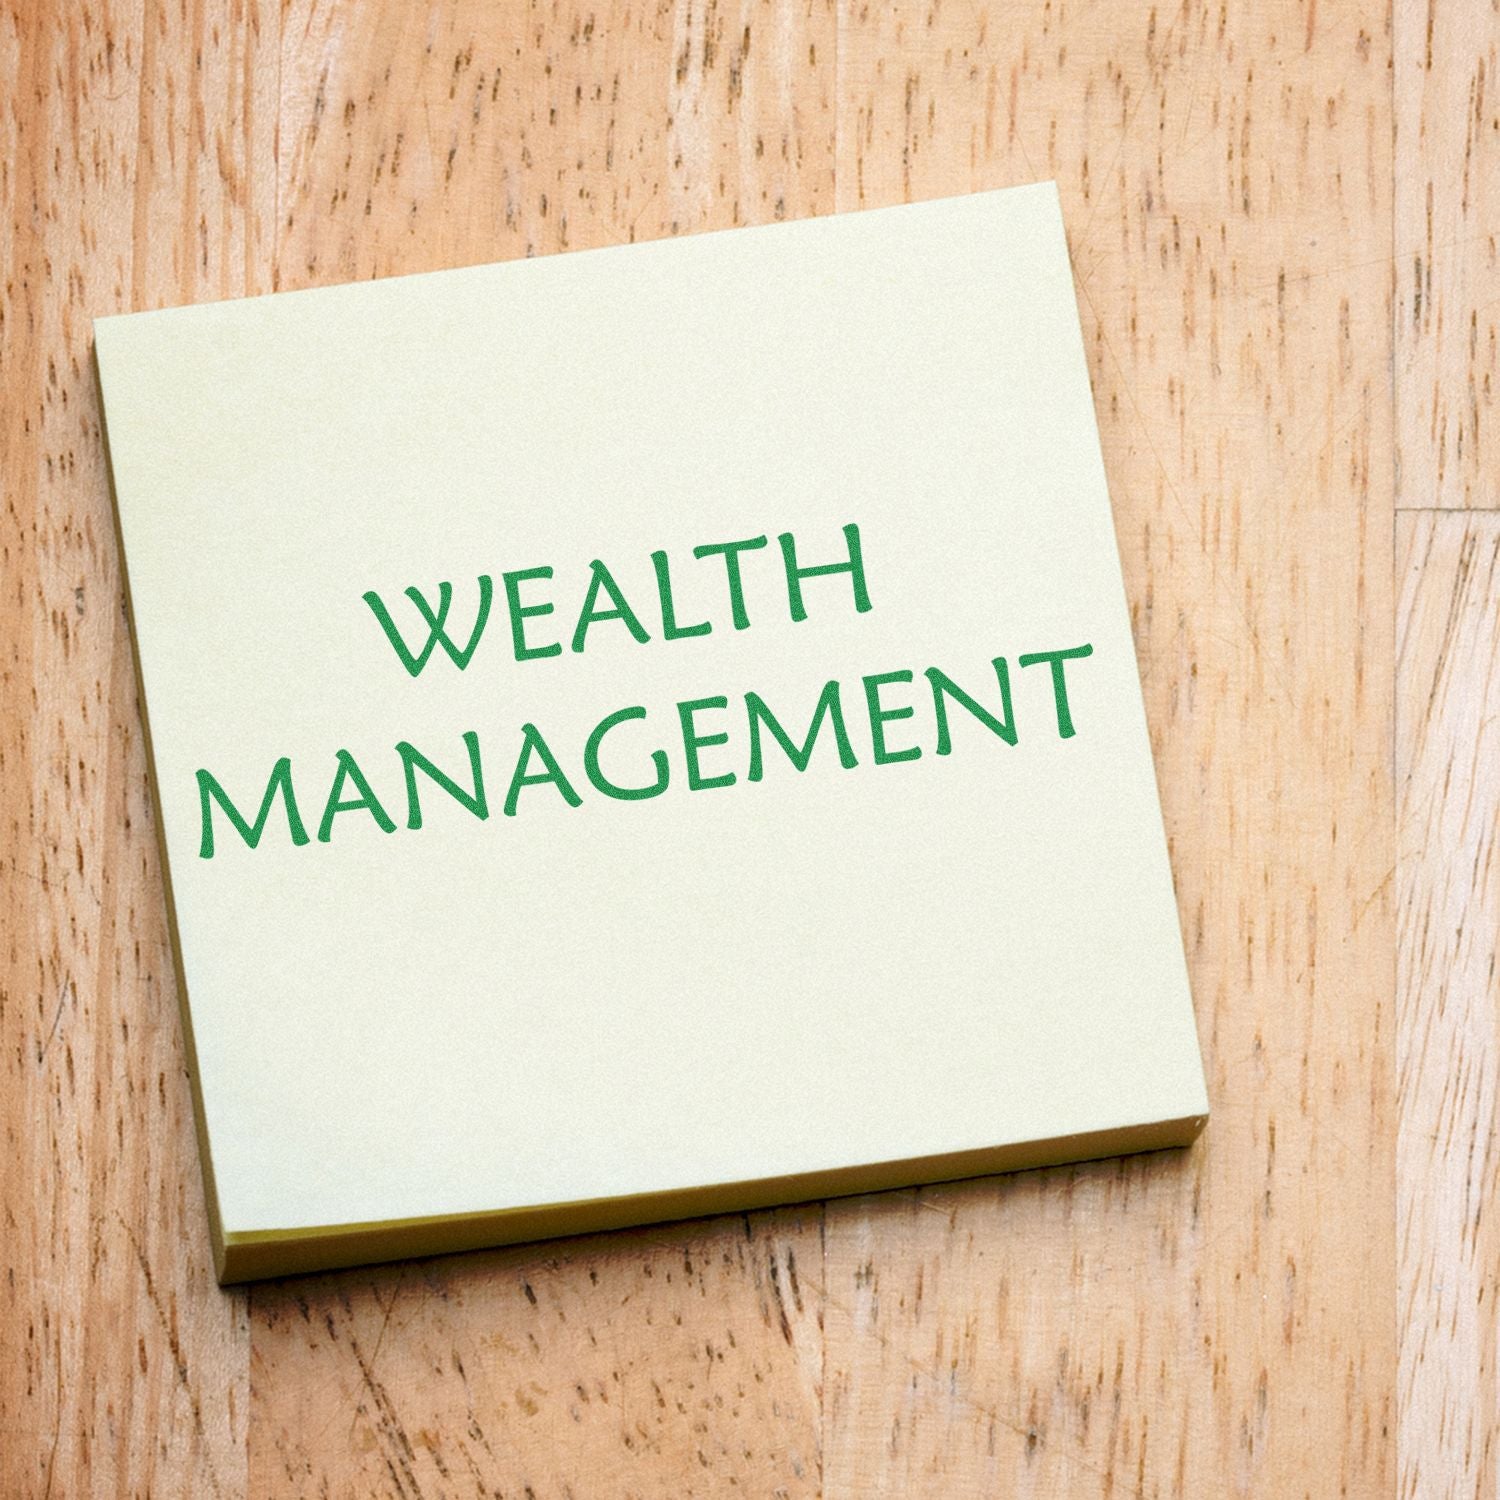 Wealth Management Rubber Stamp In Use